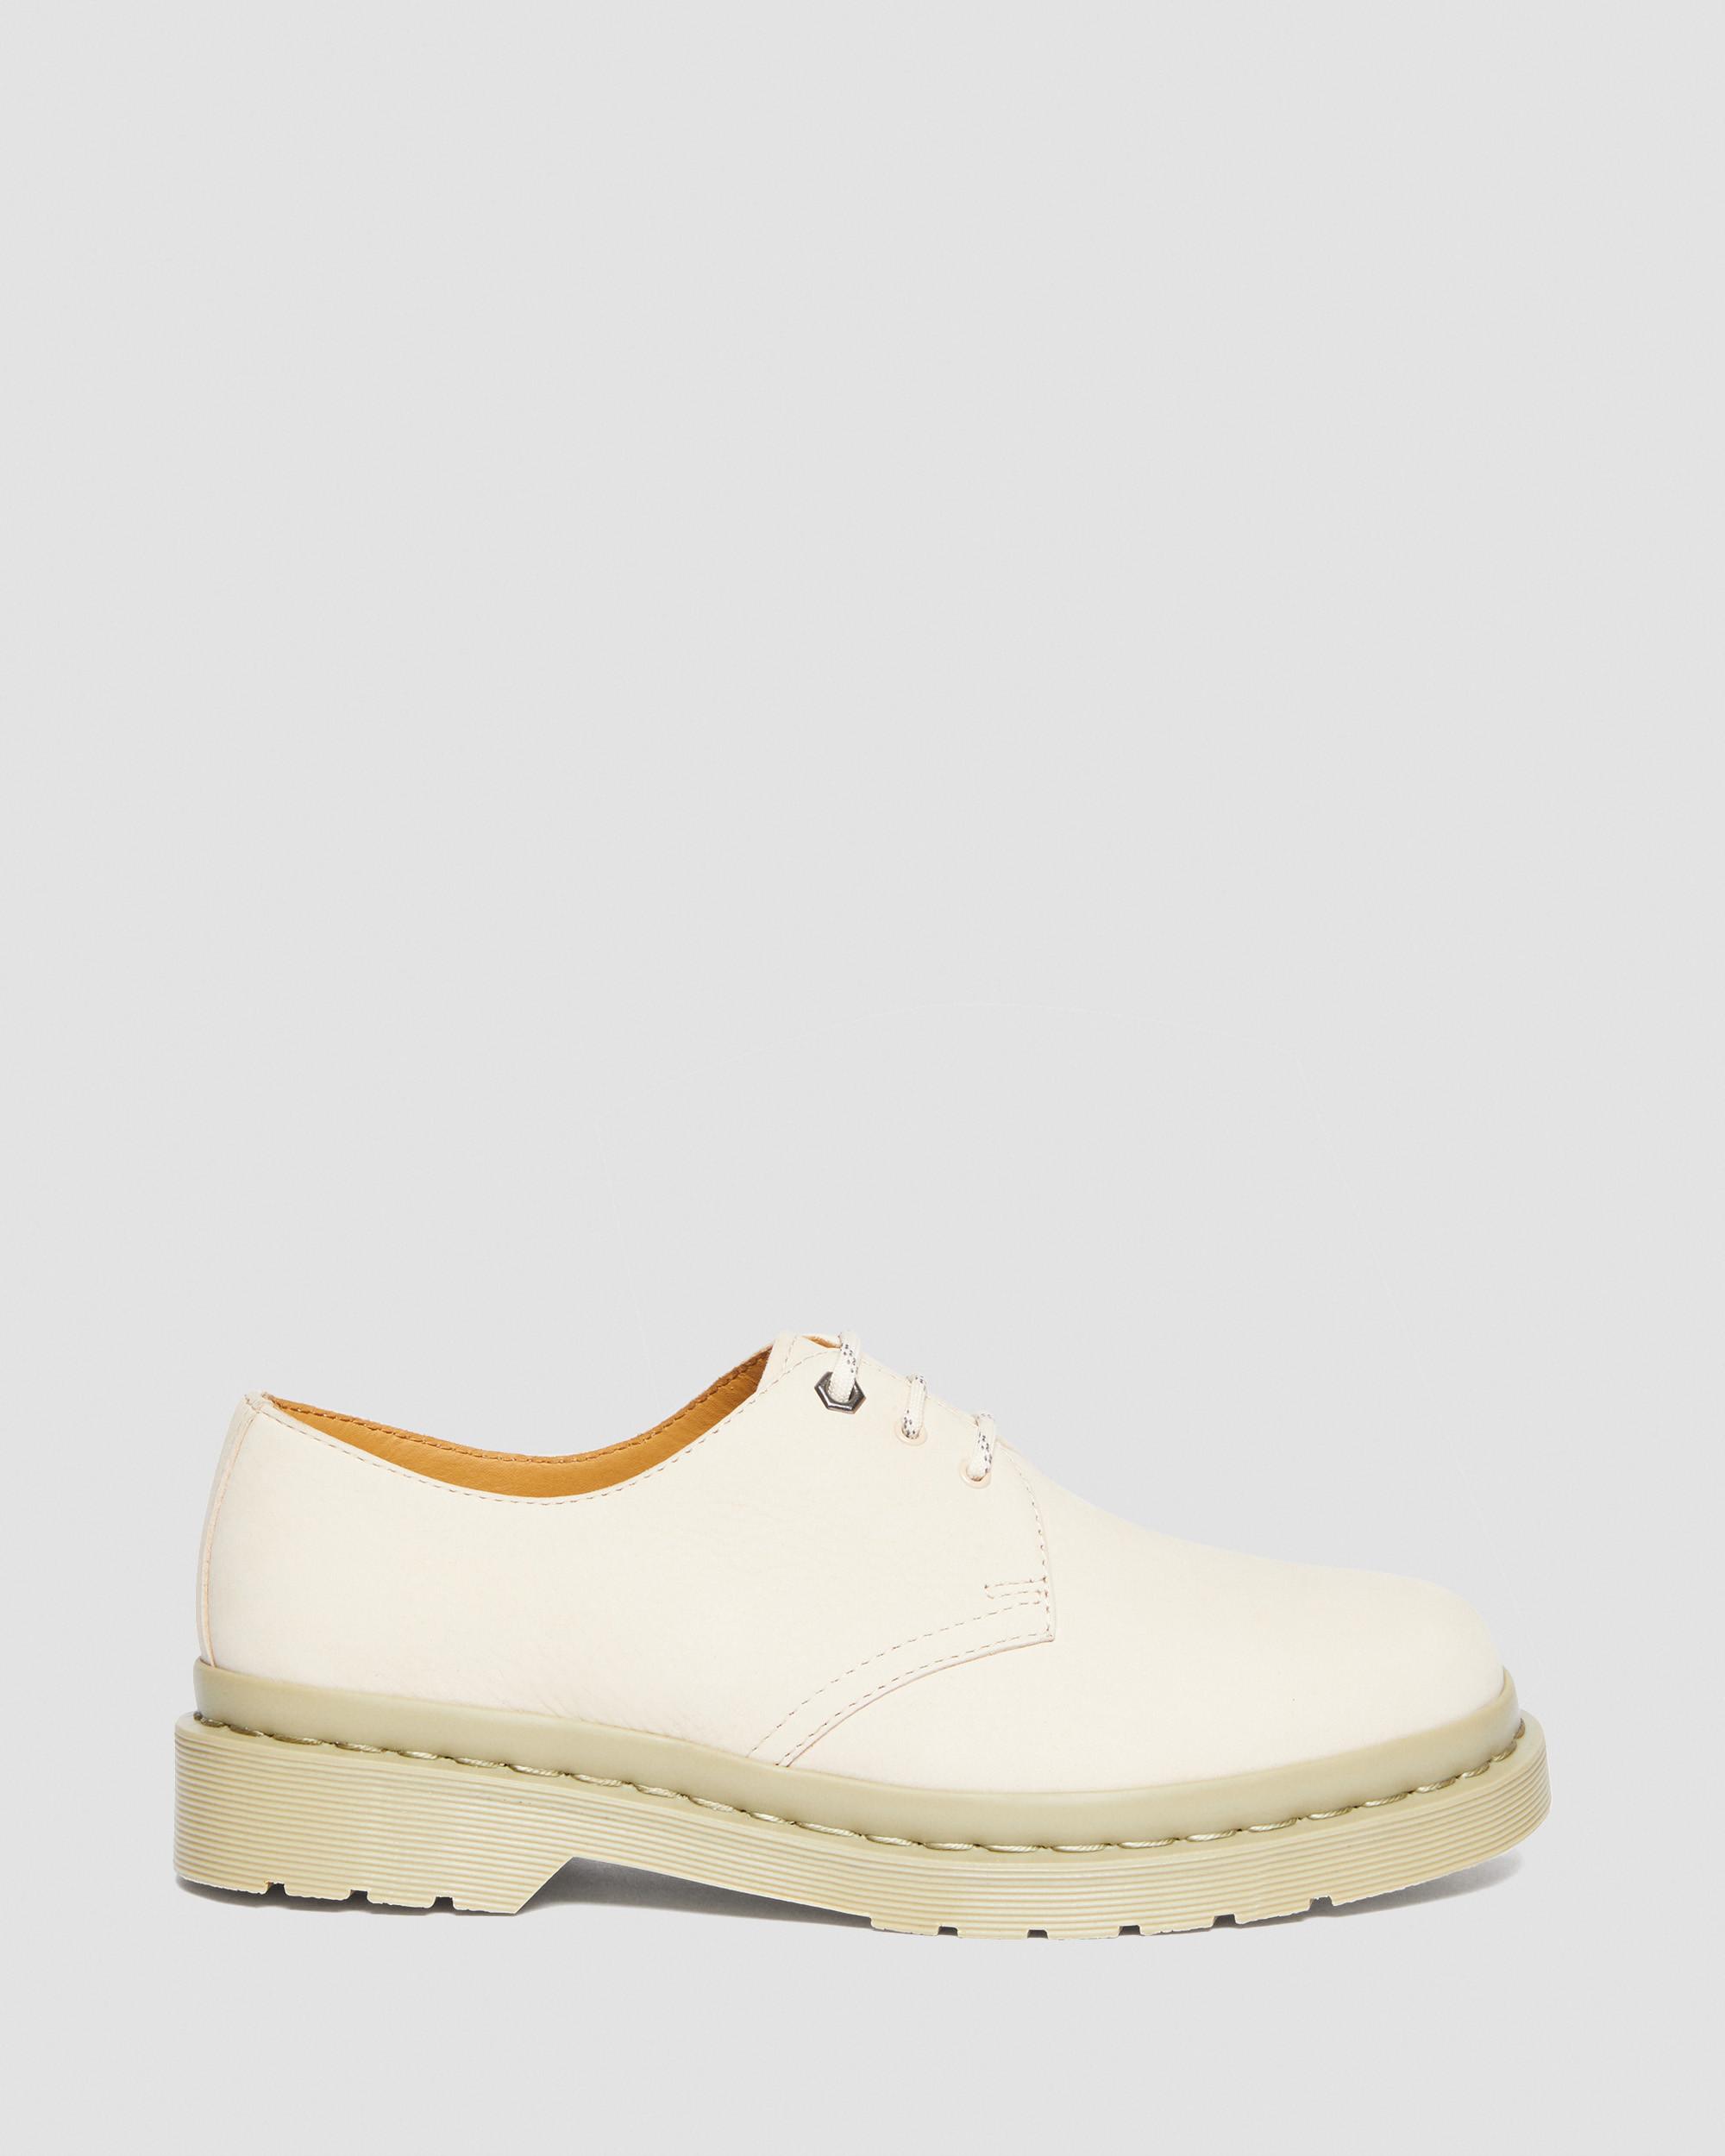 Dr. Martens 1461 Mono Milled Nubuck Leather Oxford Shoes In Parchment ...